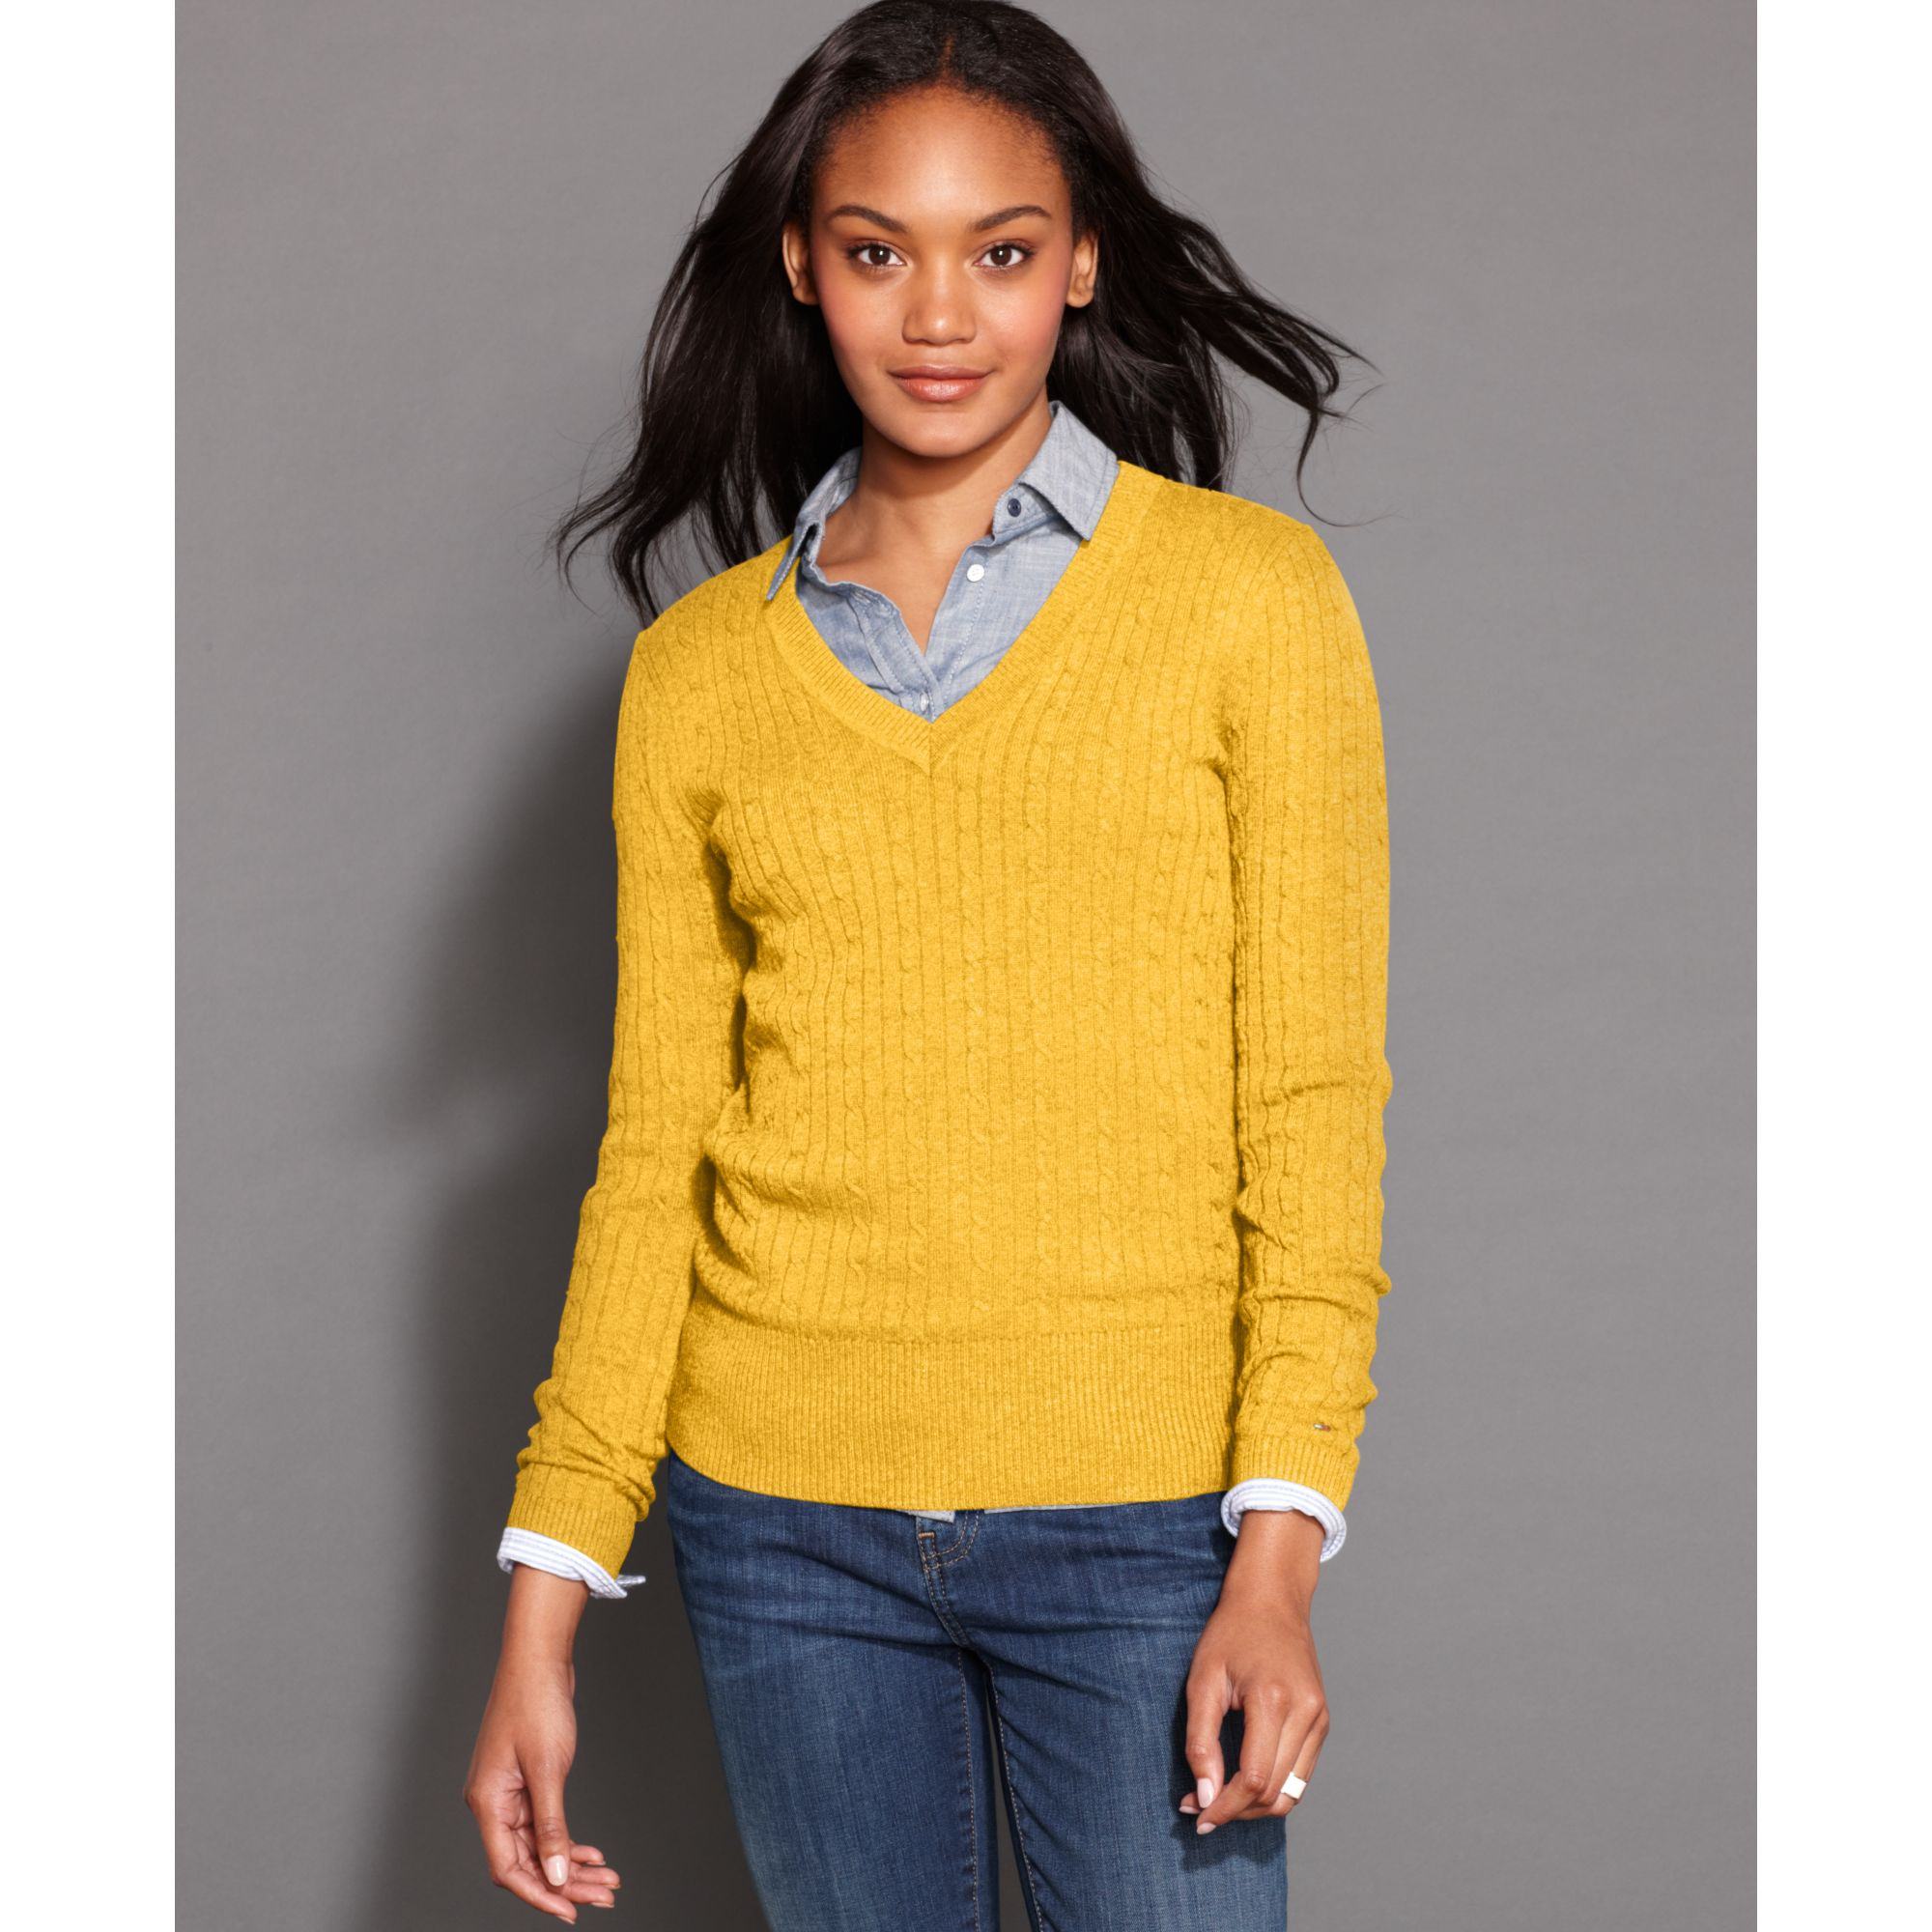 Yellow Tommy Sweater Top Sellers - anuariocidob.org 1689411998